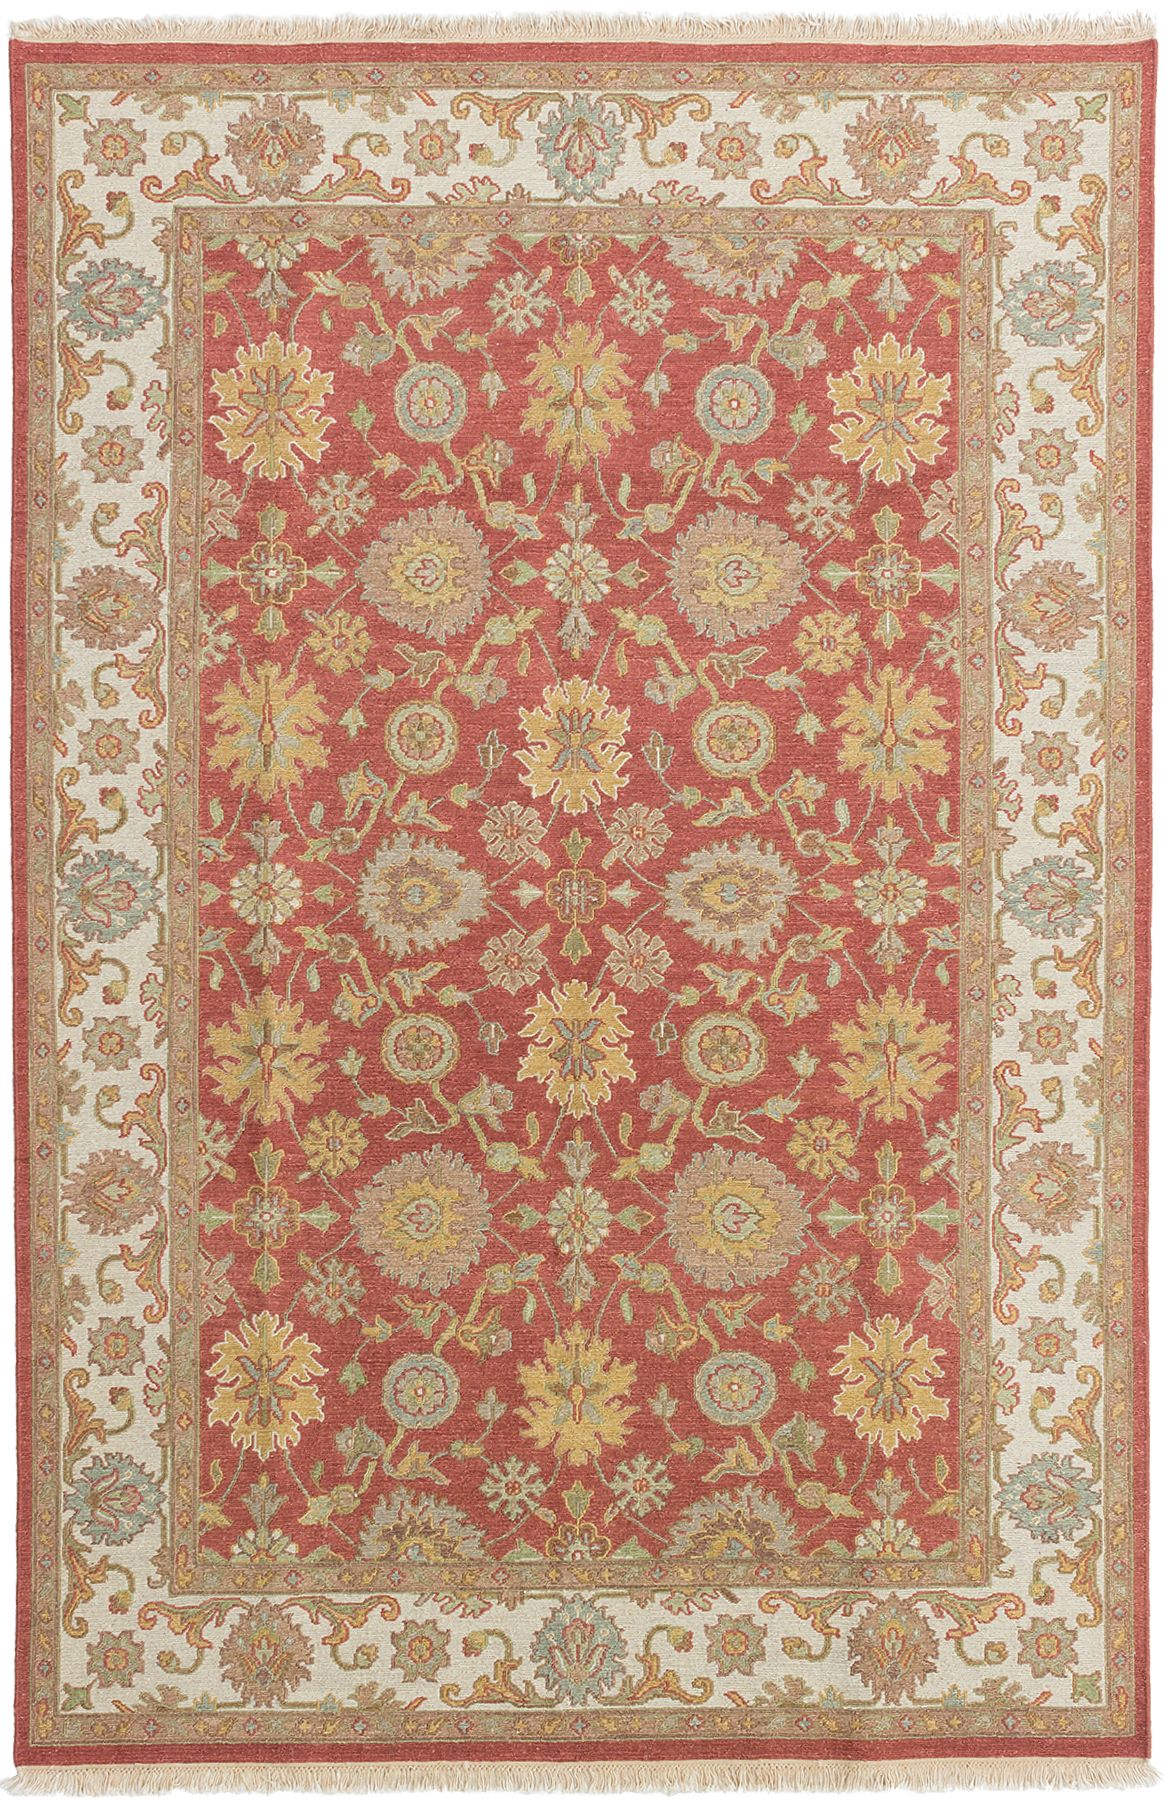 Hand woven Lahor Finest Red Wool Rug 5'7" x 8'6" Size: 5'7" x 8'6"  